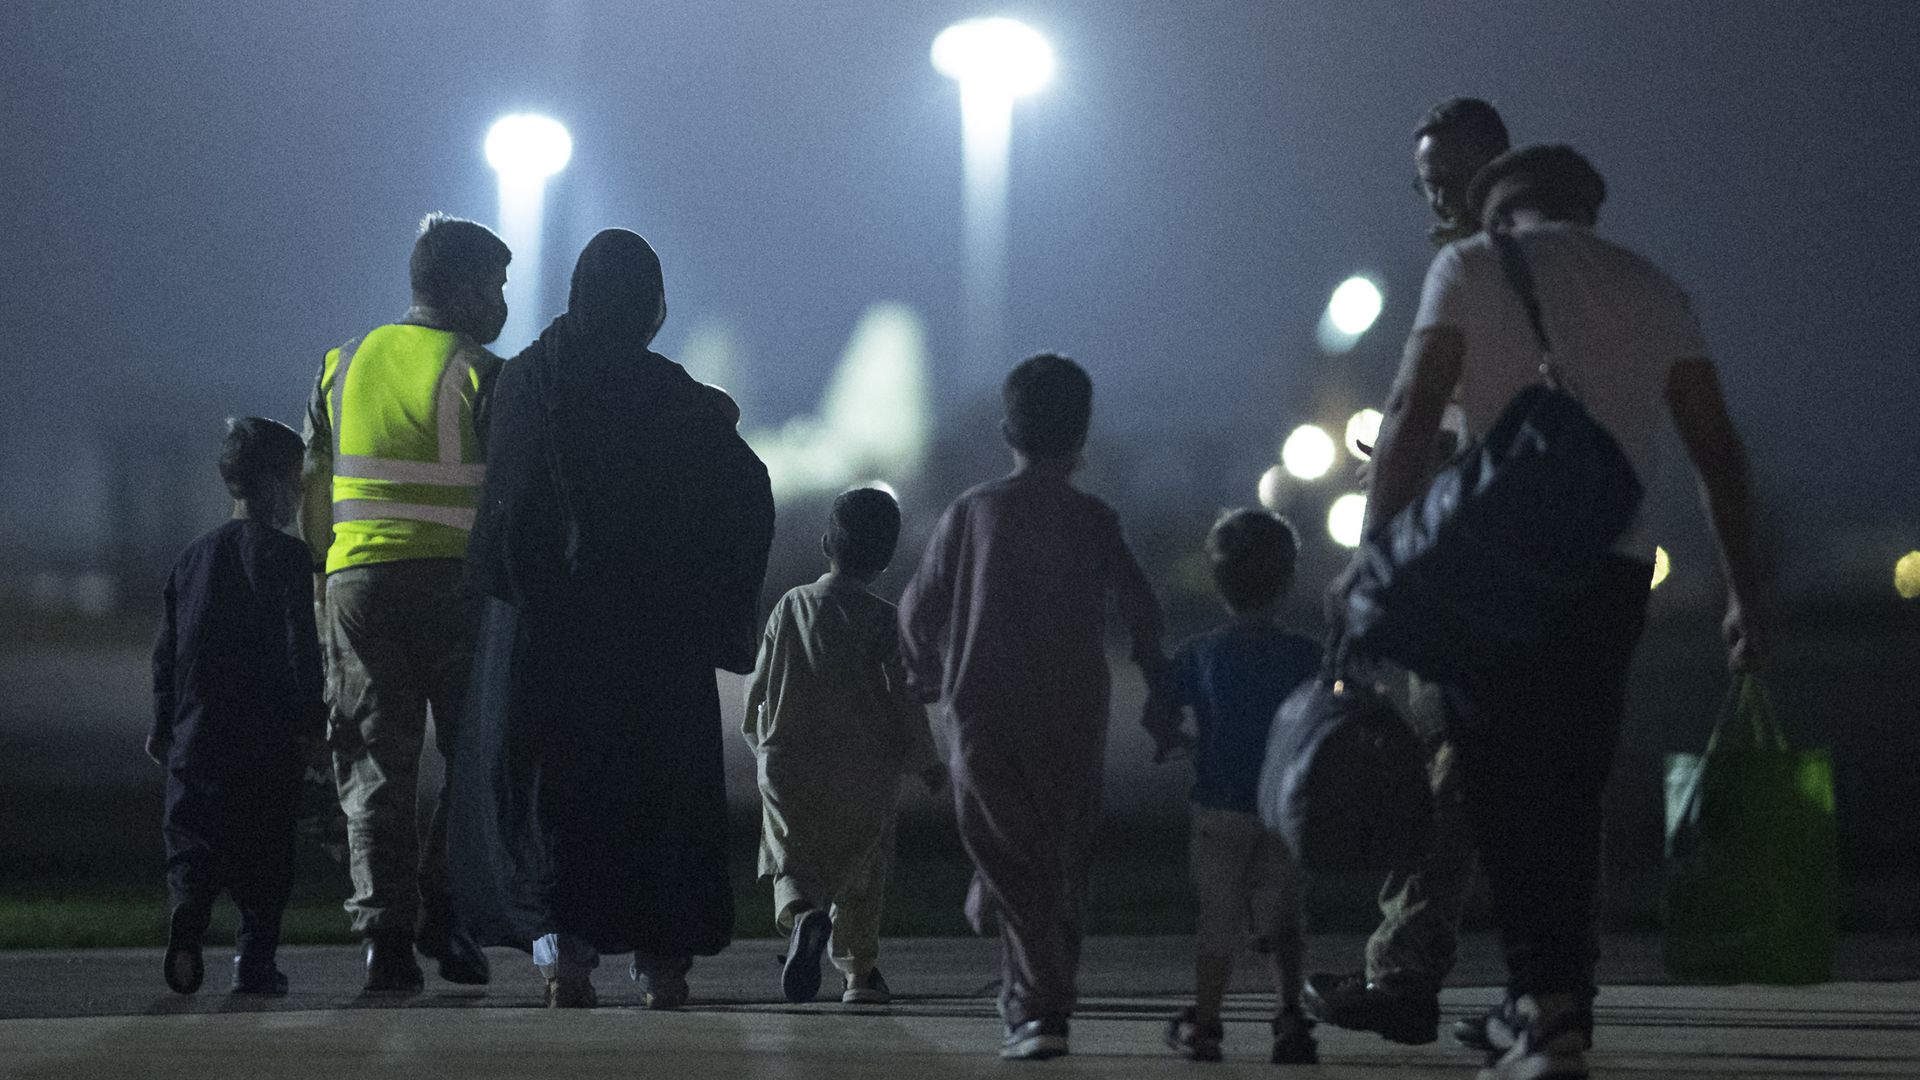  Passengers evacuated from Afghanistan disembark from a British Royal Air Force (RAF) Airbus KC2 Voyager aircraft, after landing at RAF Brize Norton station in southern England on August 24